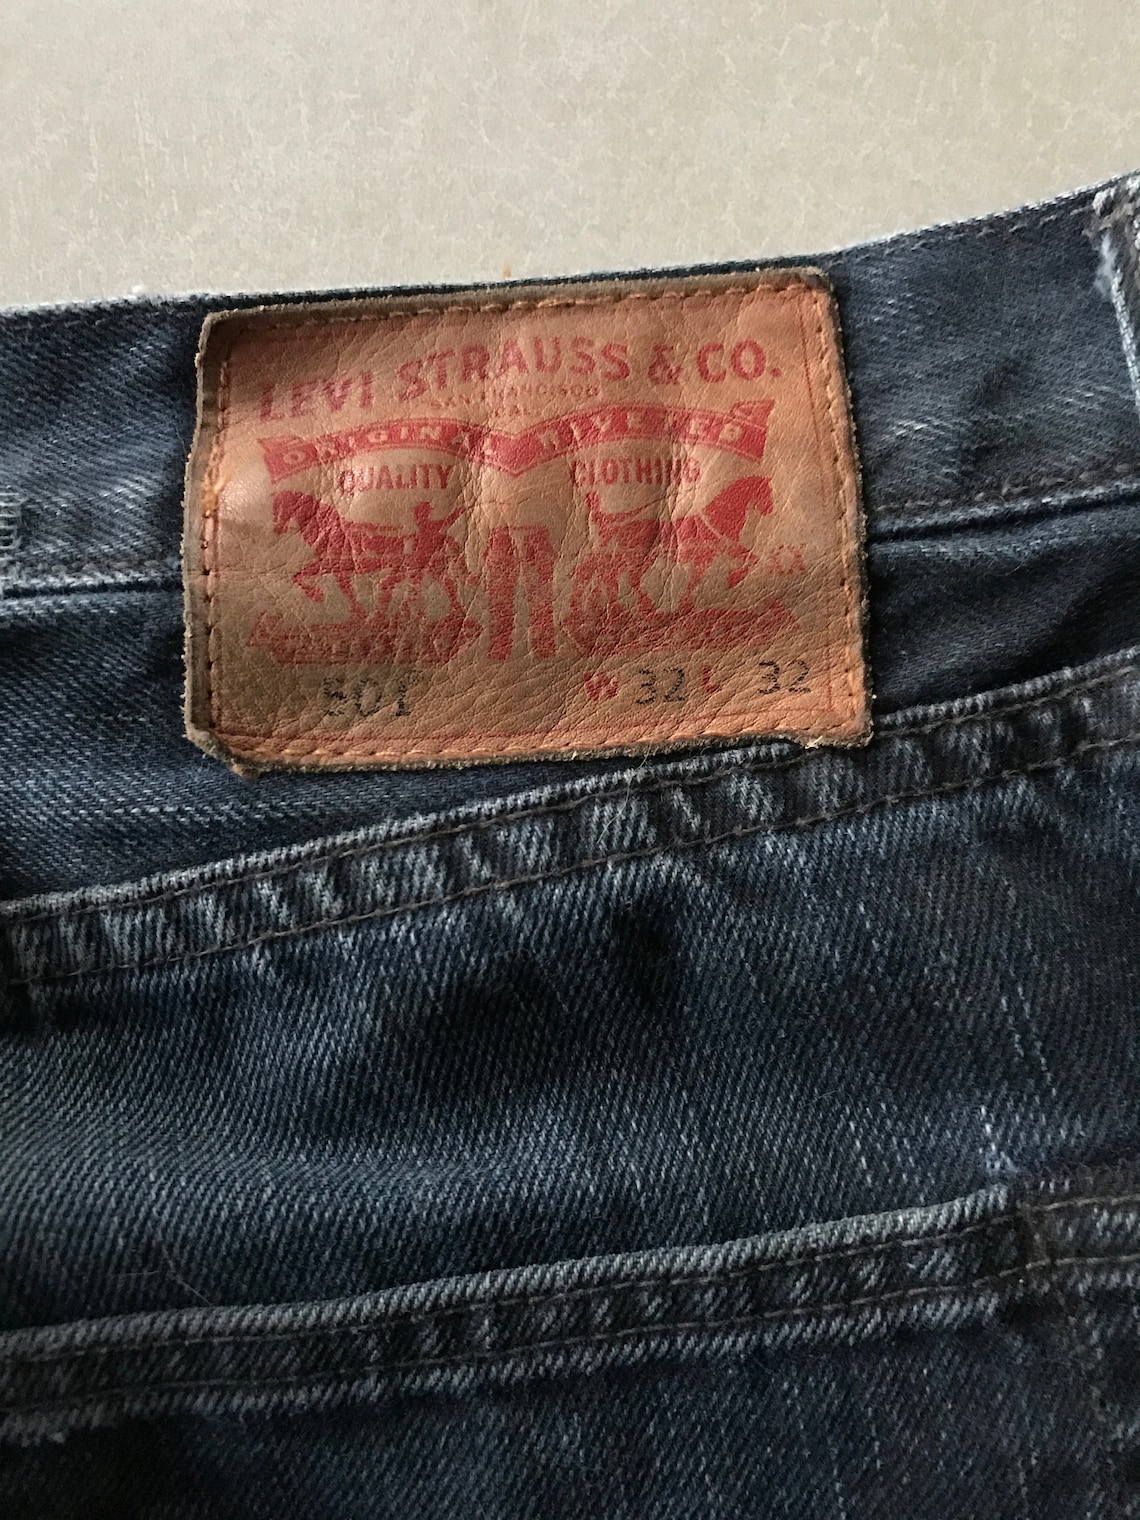 Levis and Wranglers Jeans Denim Fabric: 3 pairs | Etsy